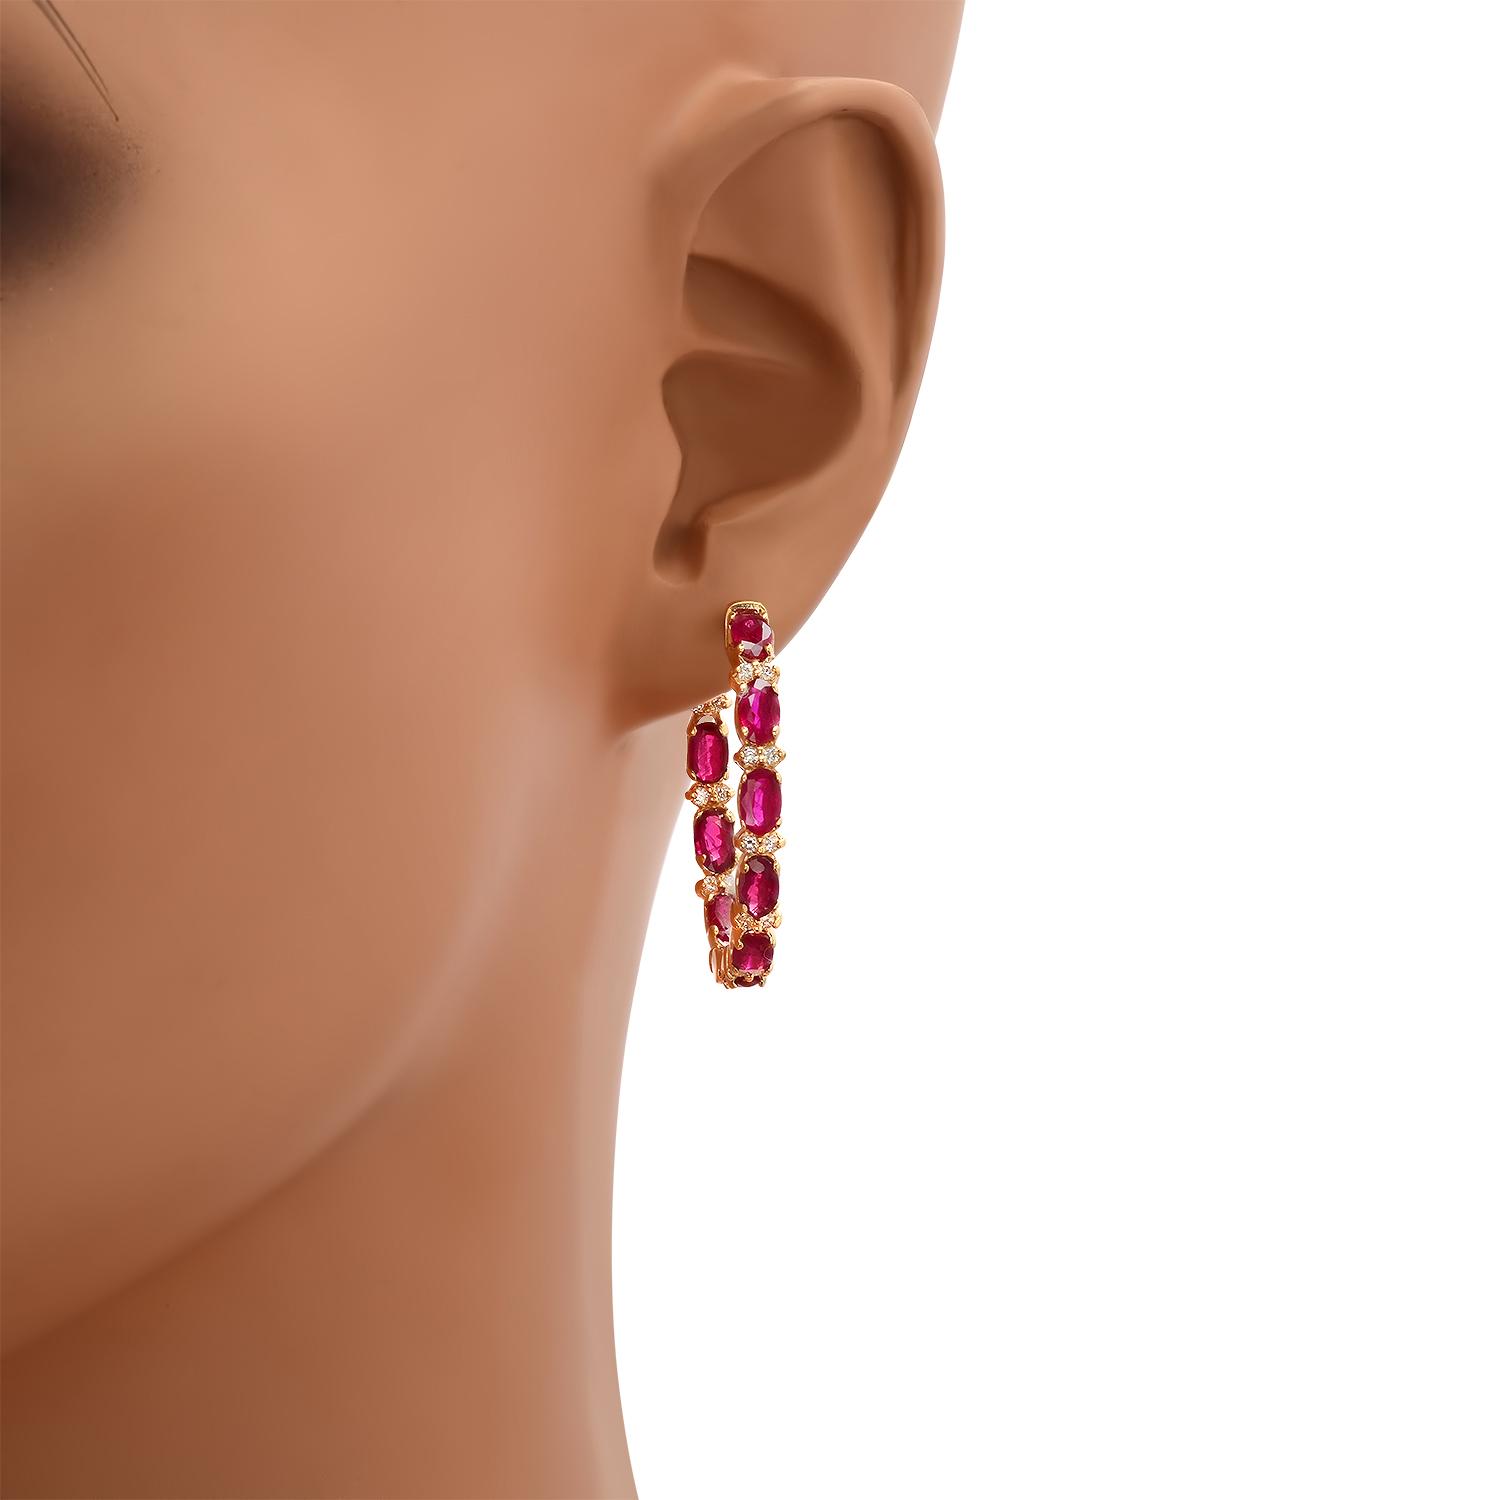 14K Yellow Gold Setting with 5.87ct Ruby and 0.35ct Diamond Earrings